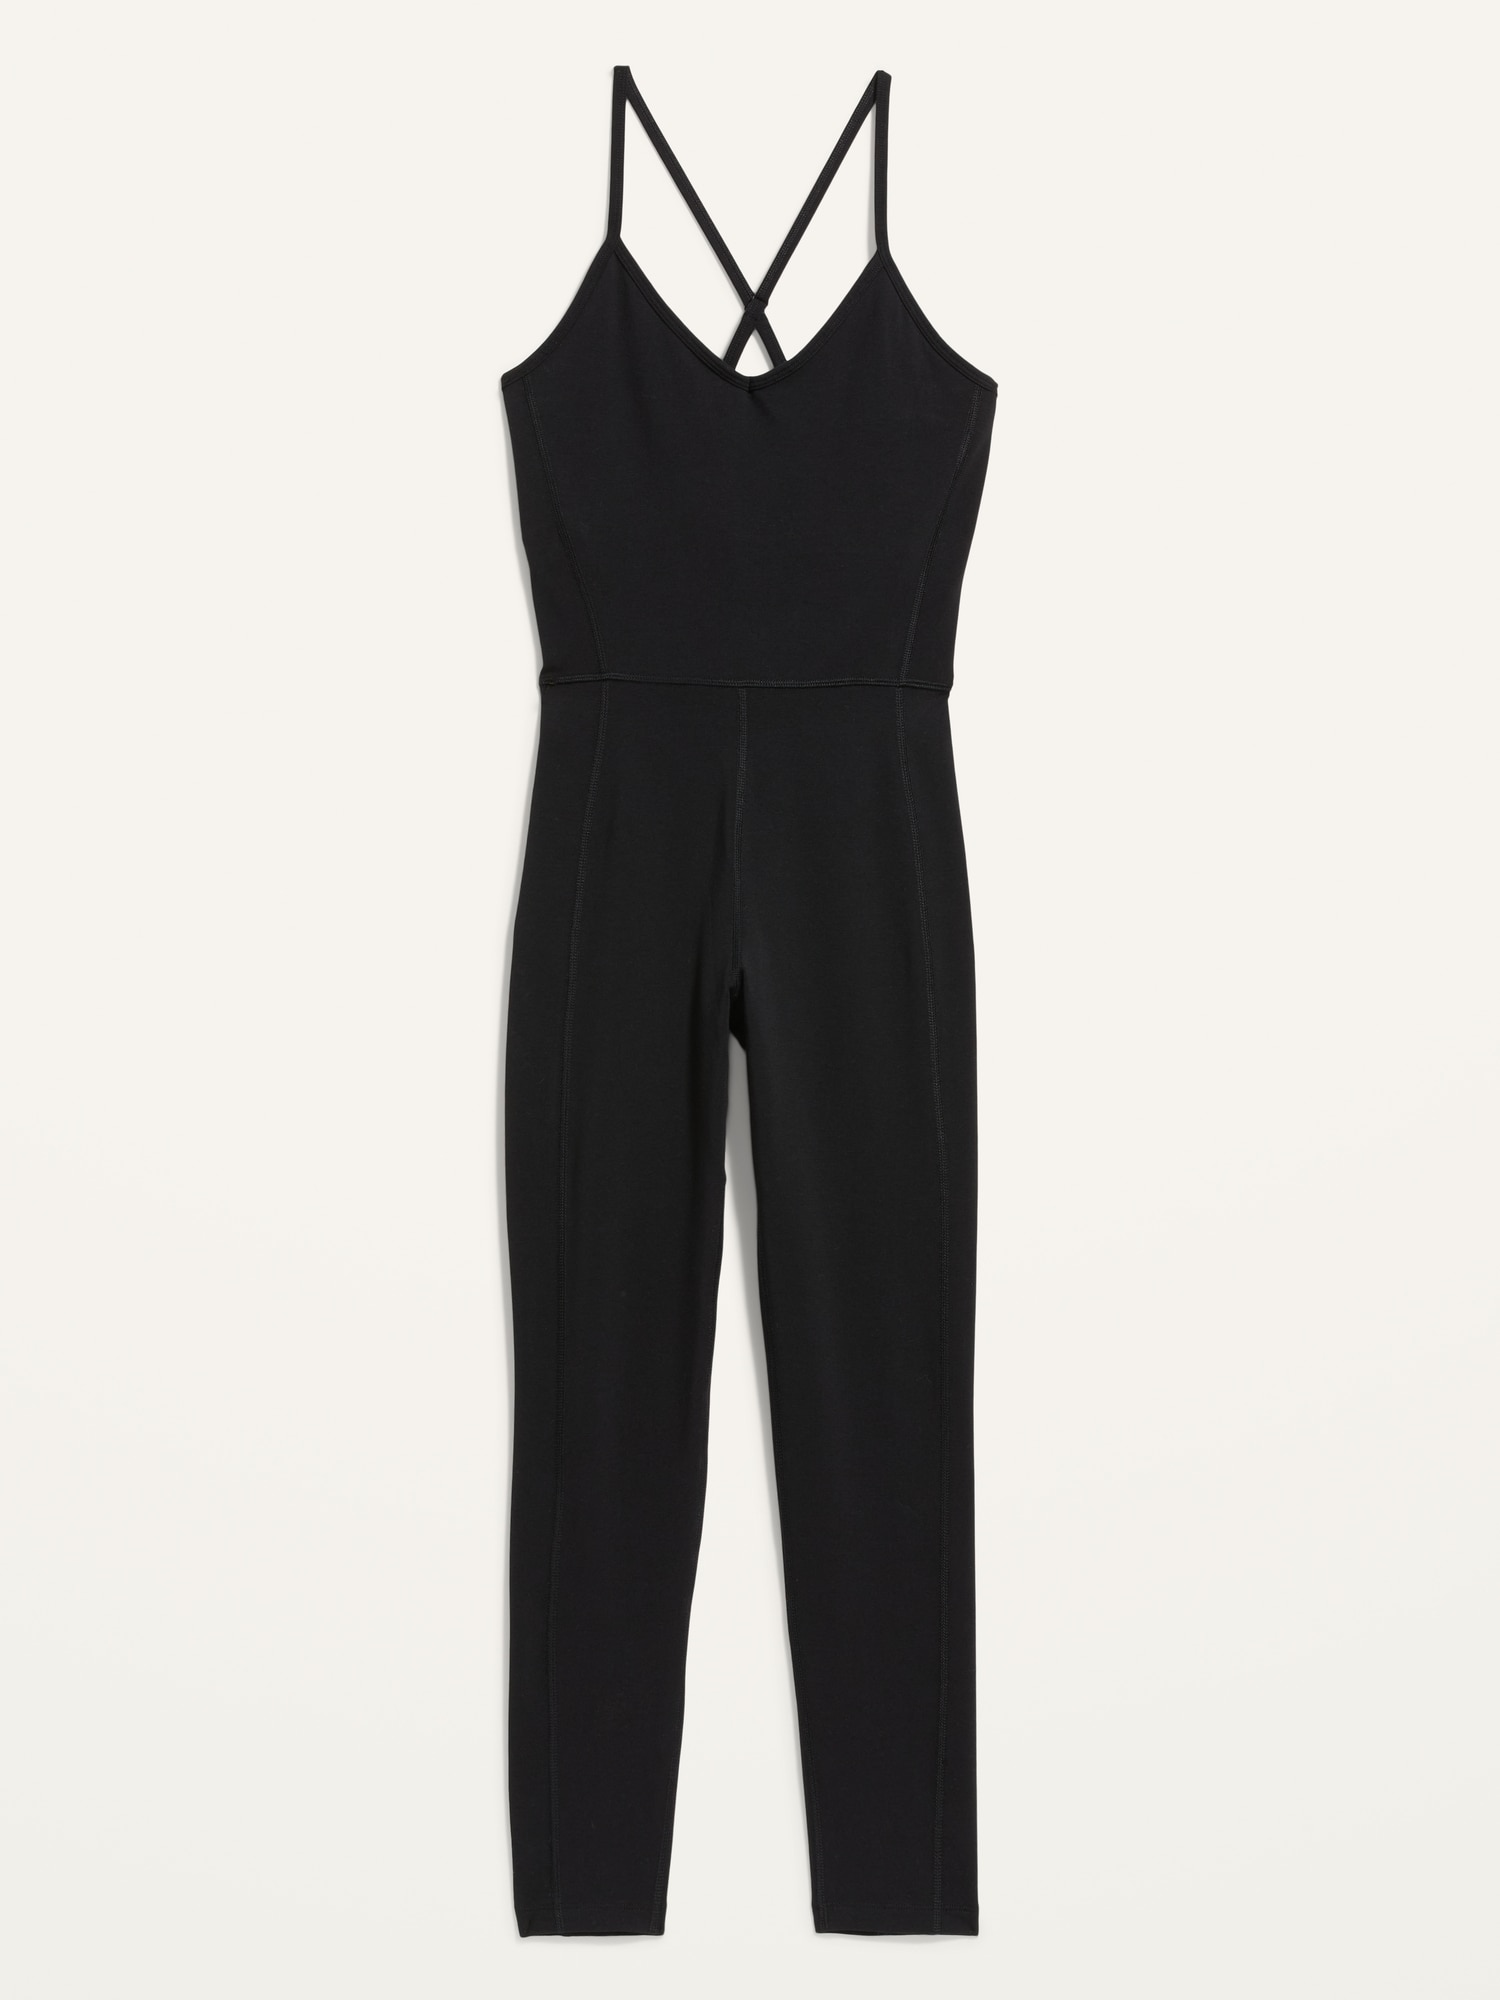 Cami Jumpsuit  Old Navy